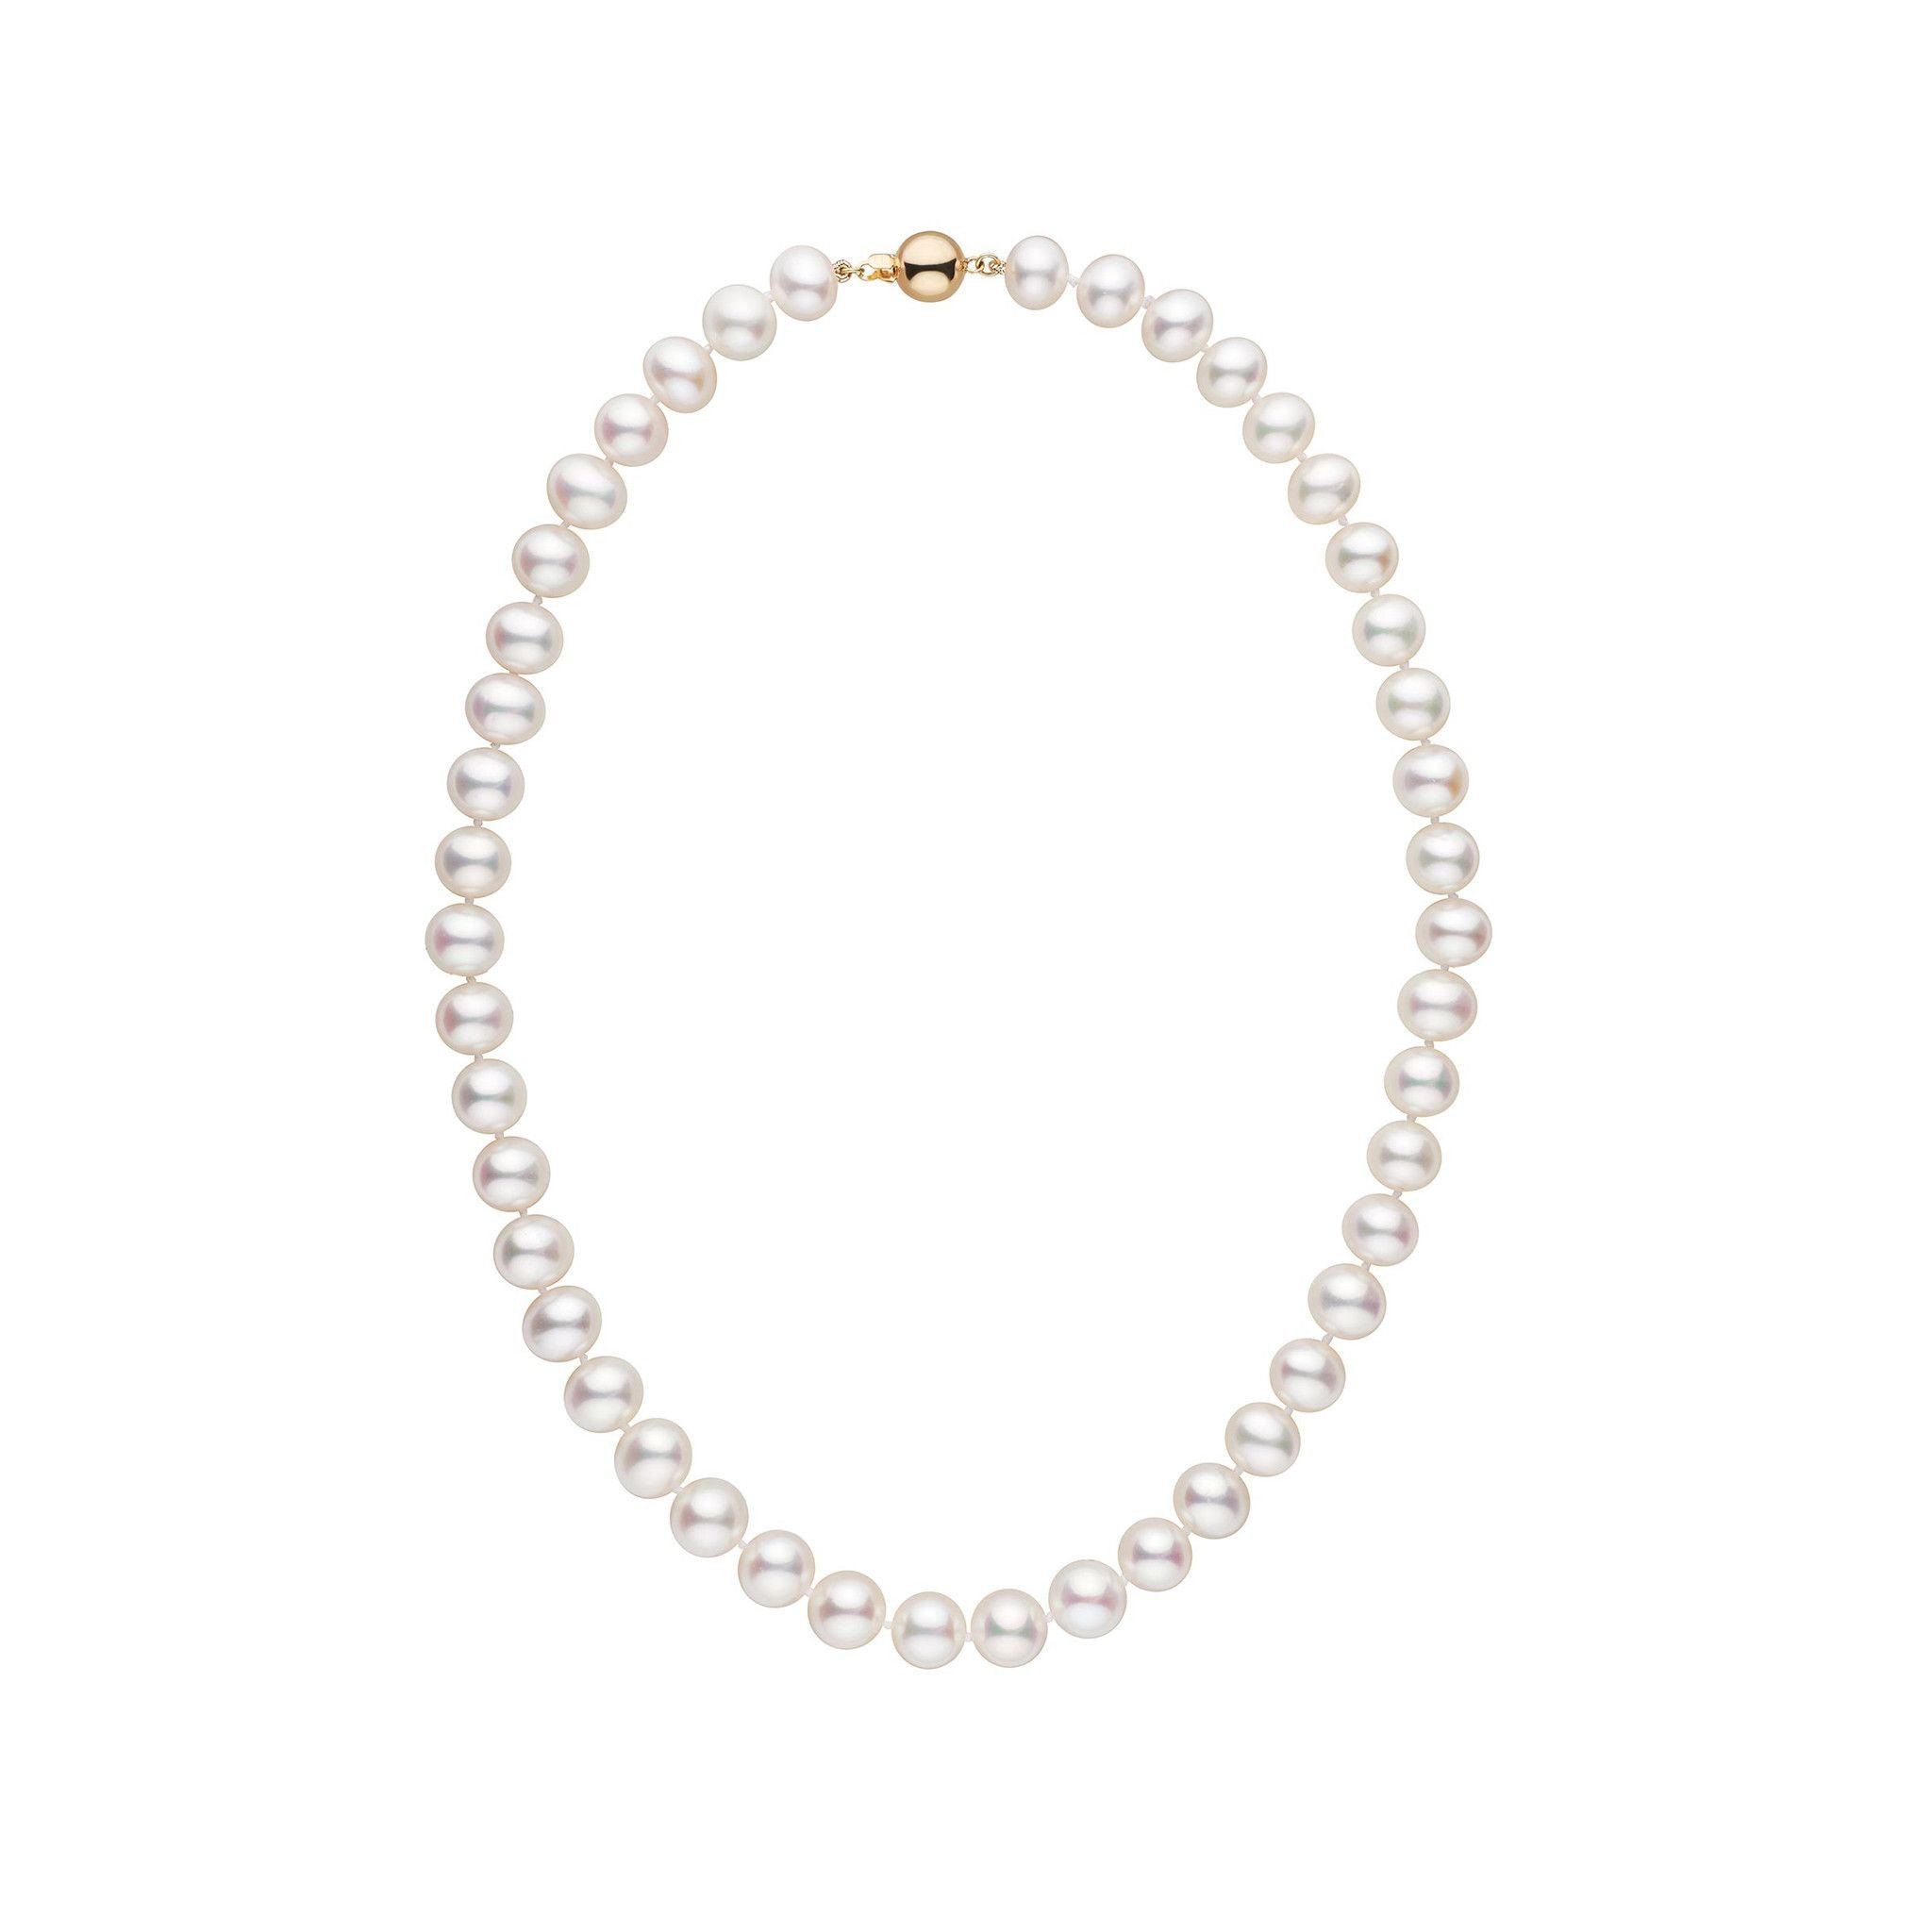 8.5-9.0 mm 16 Inch AA+ White Freshwater Pearl Necklace